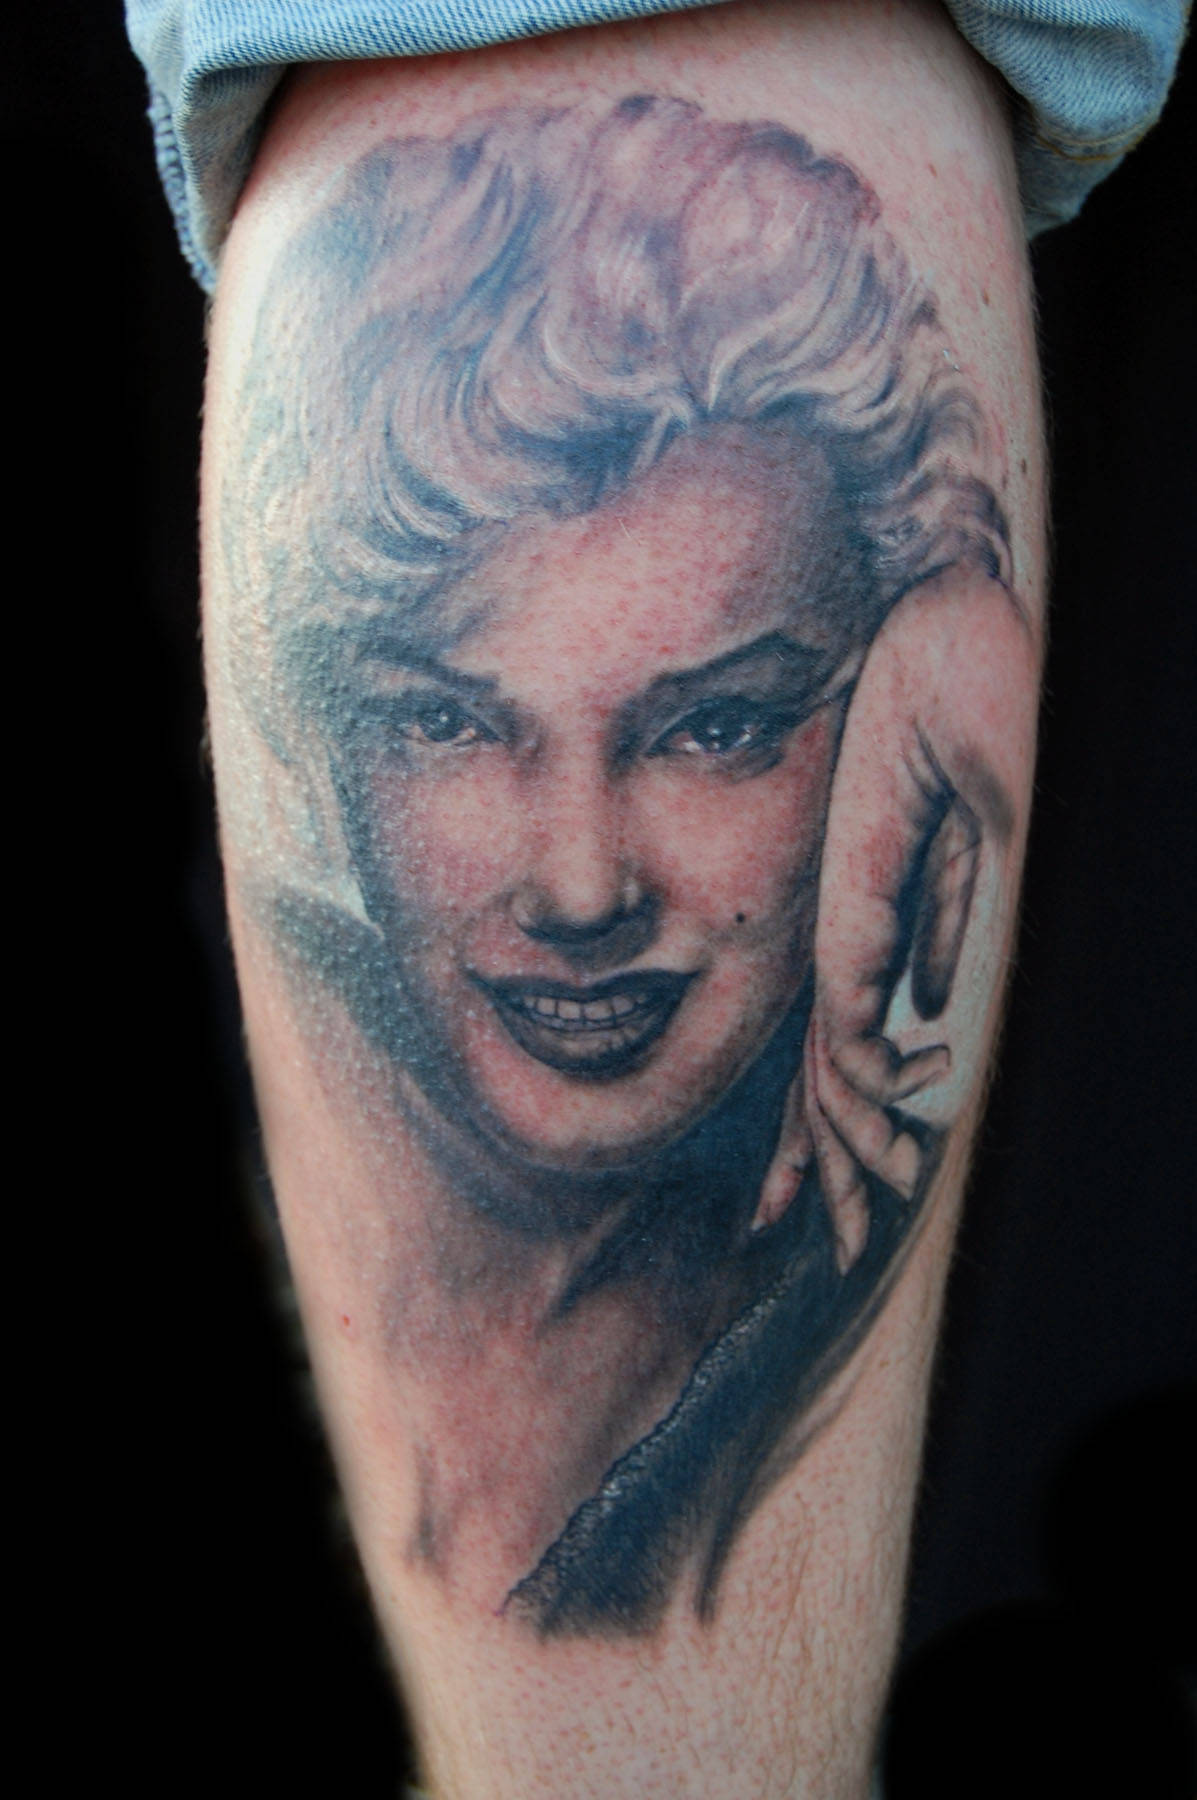 Portrait Tattoos Designs, Ideas and Meaning | Tattoos For You